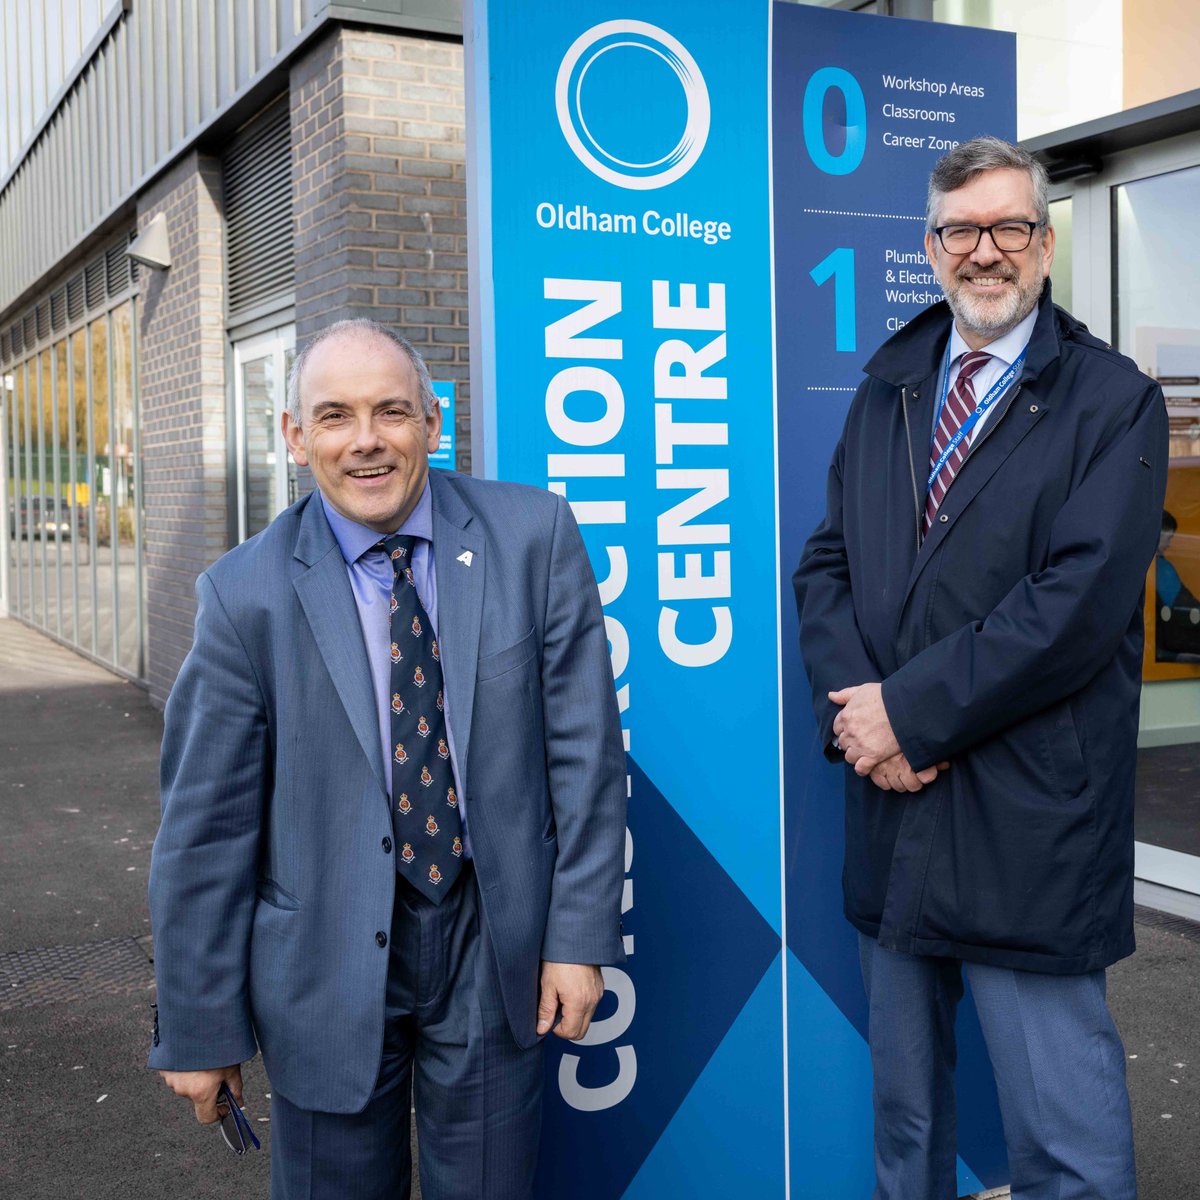 Did you know @Tilbury_douglas offer a wide range of industry T Level placements on our sites?

Thank you to @OldhamCollege for the opportunity to showcase the benefits of our placements to  @halfon4harlowMP @educationgovuk yesterday.
#TLevelThursday #TilburyDouglas #Construction